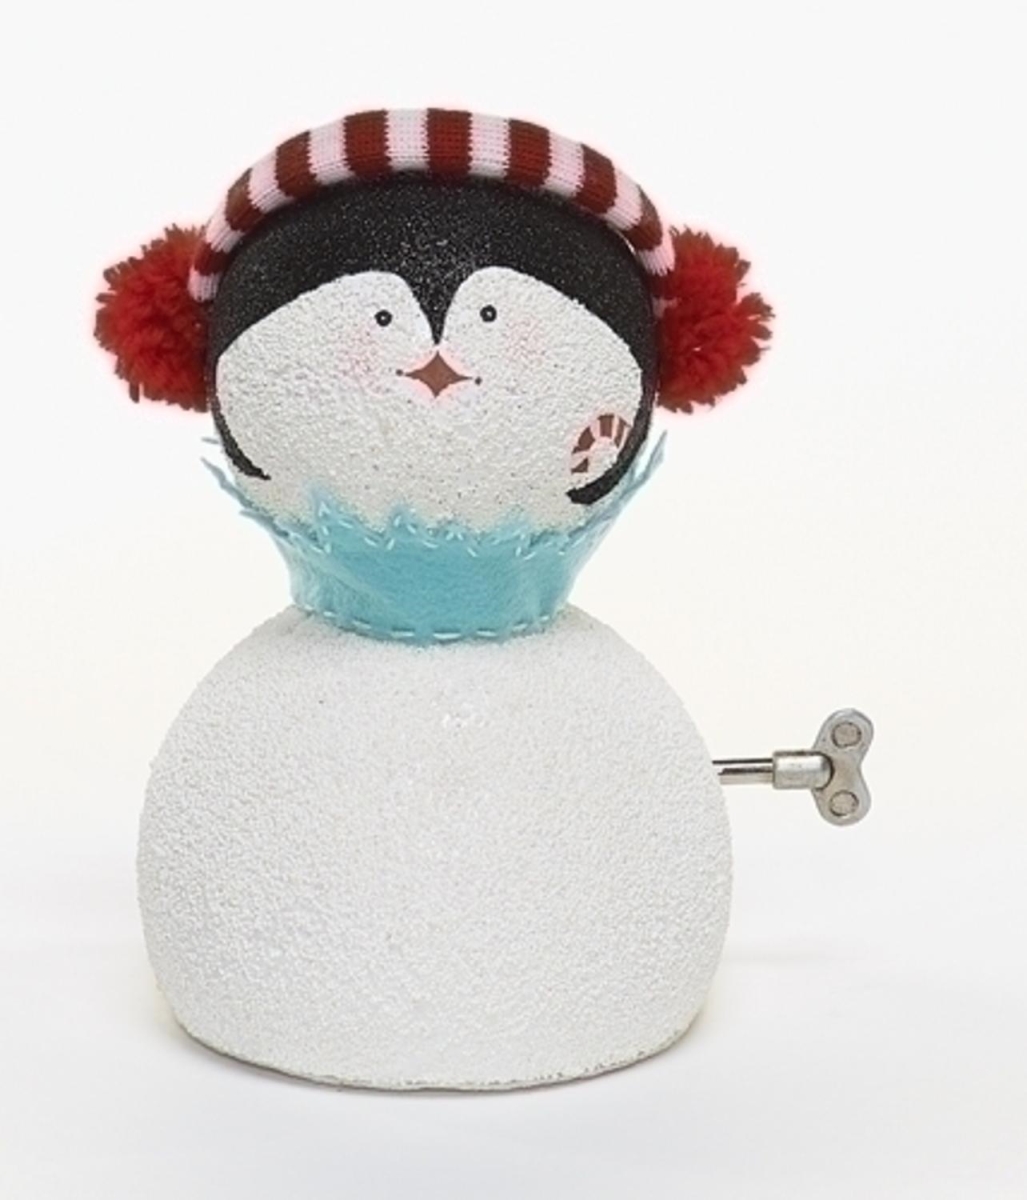 31071055 8.75 In. Happy Holidays Animated Musical Penguin Face Christmas Figure